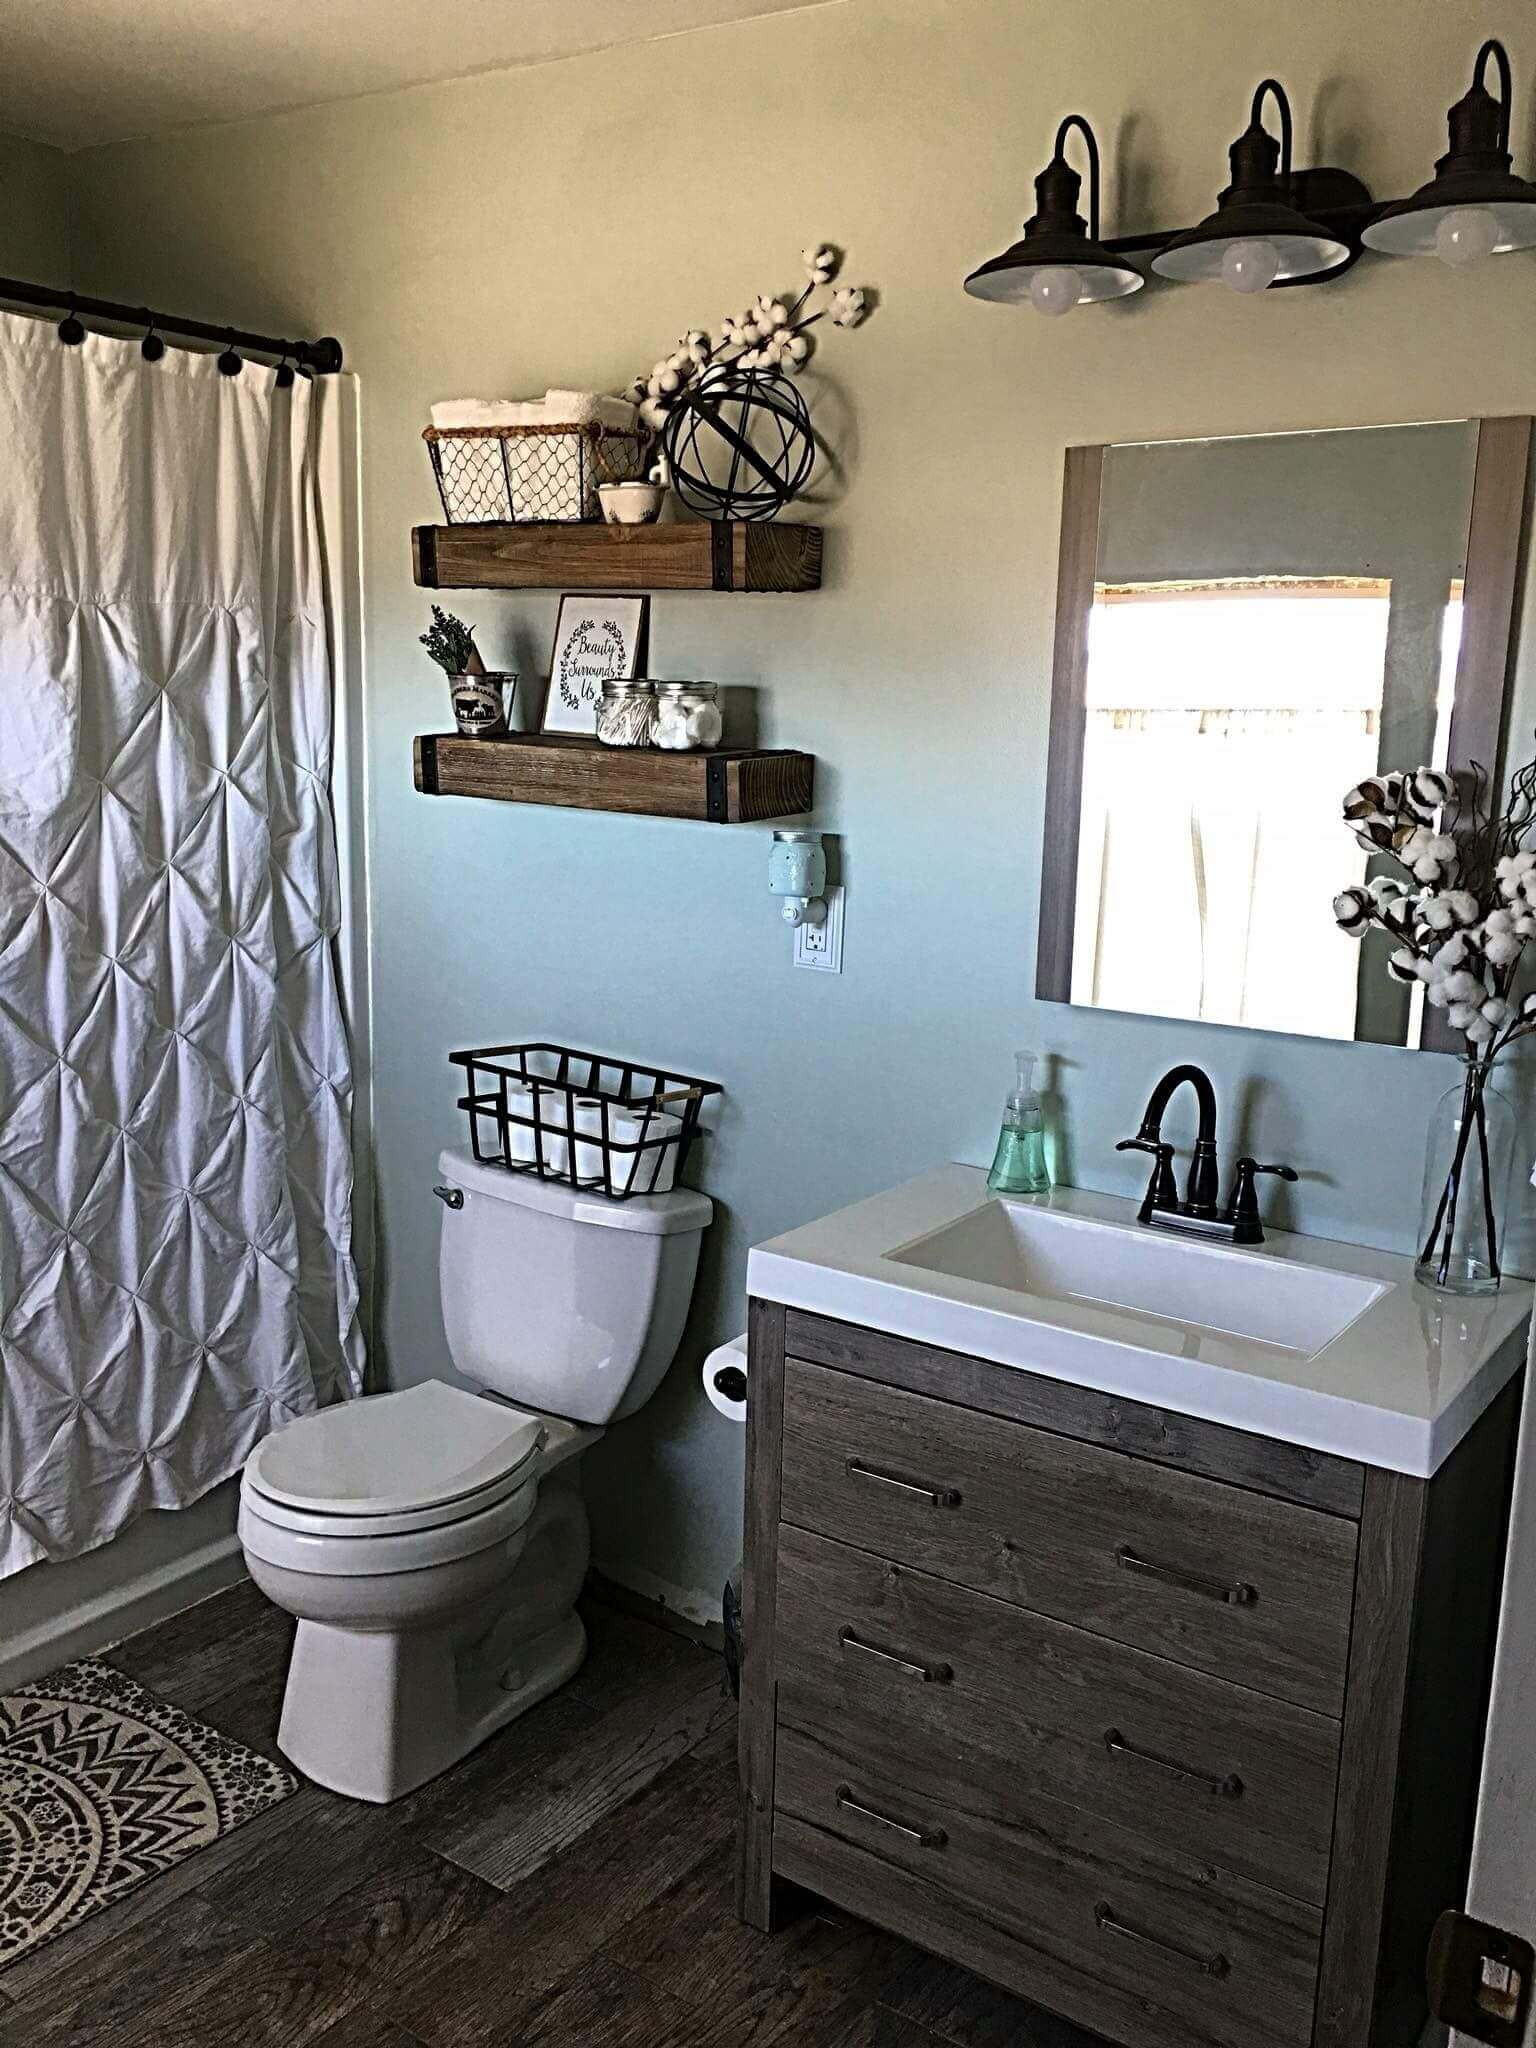 Small Guest Bathroom Ideas
 29 Small Guest Bathroom Ideas to ‘Wow’ Your Visitors